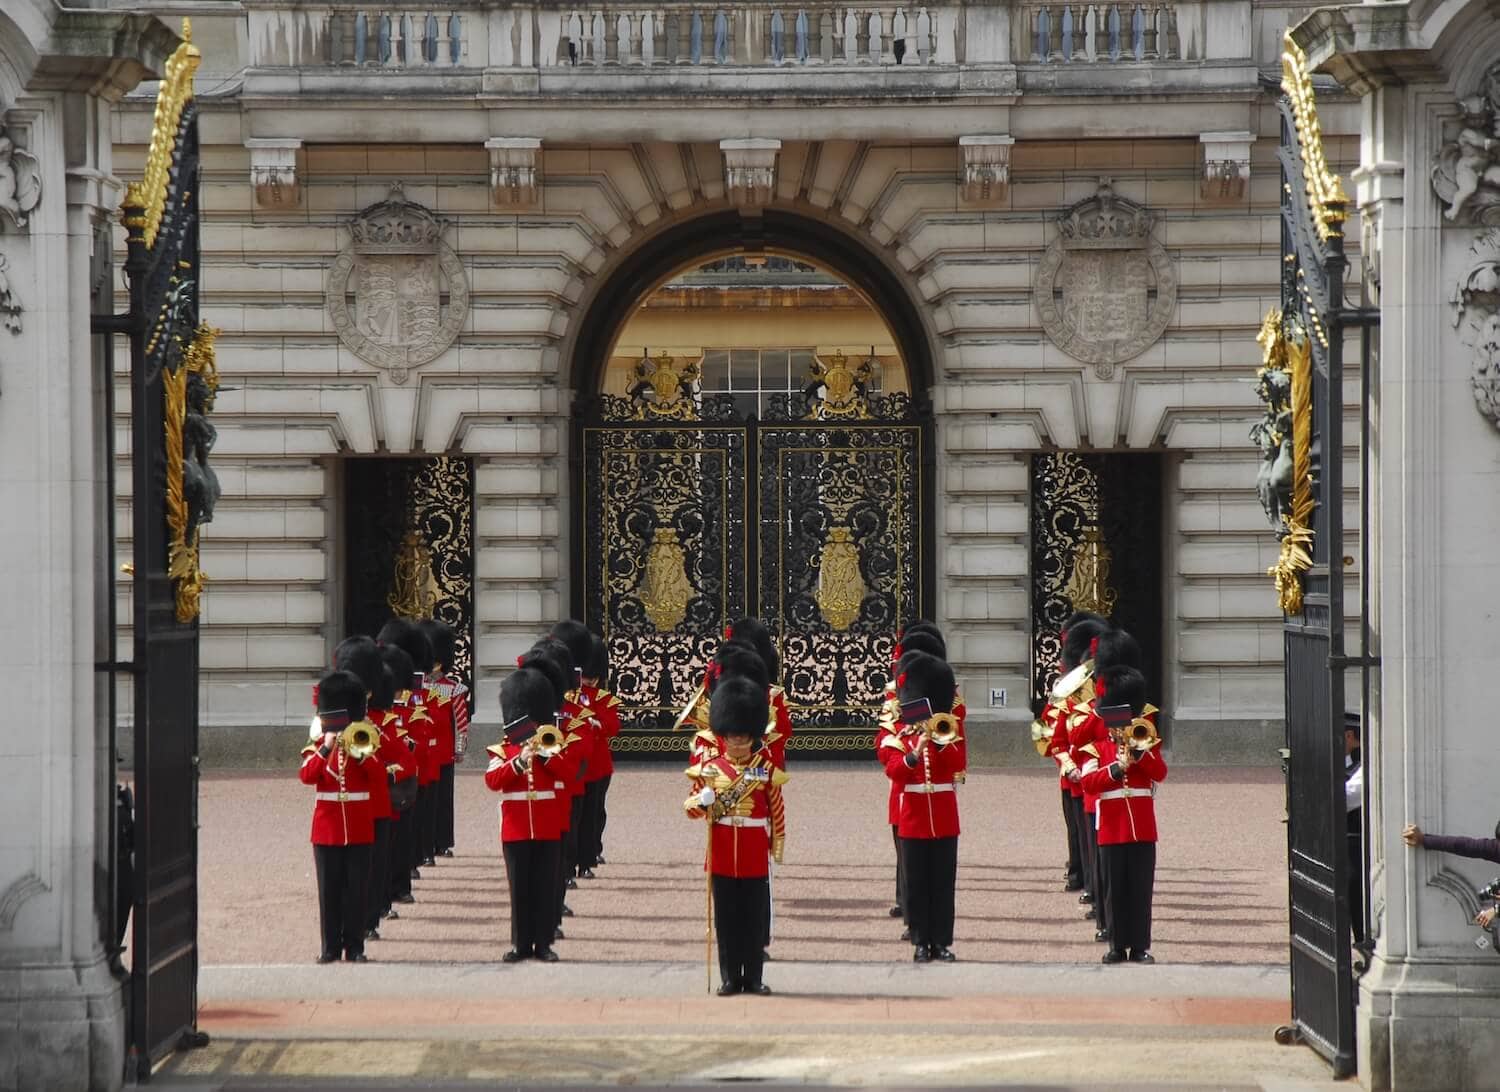 Guards marching in front of Buckingham Palace